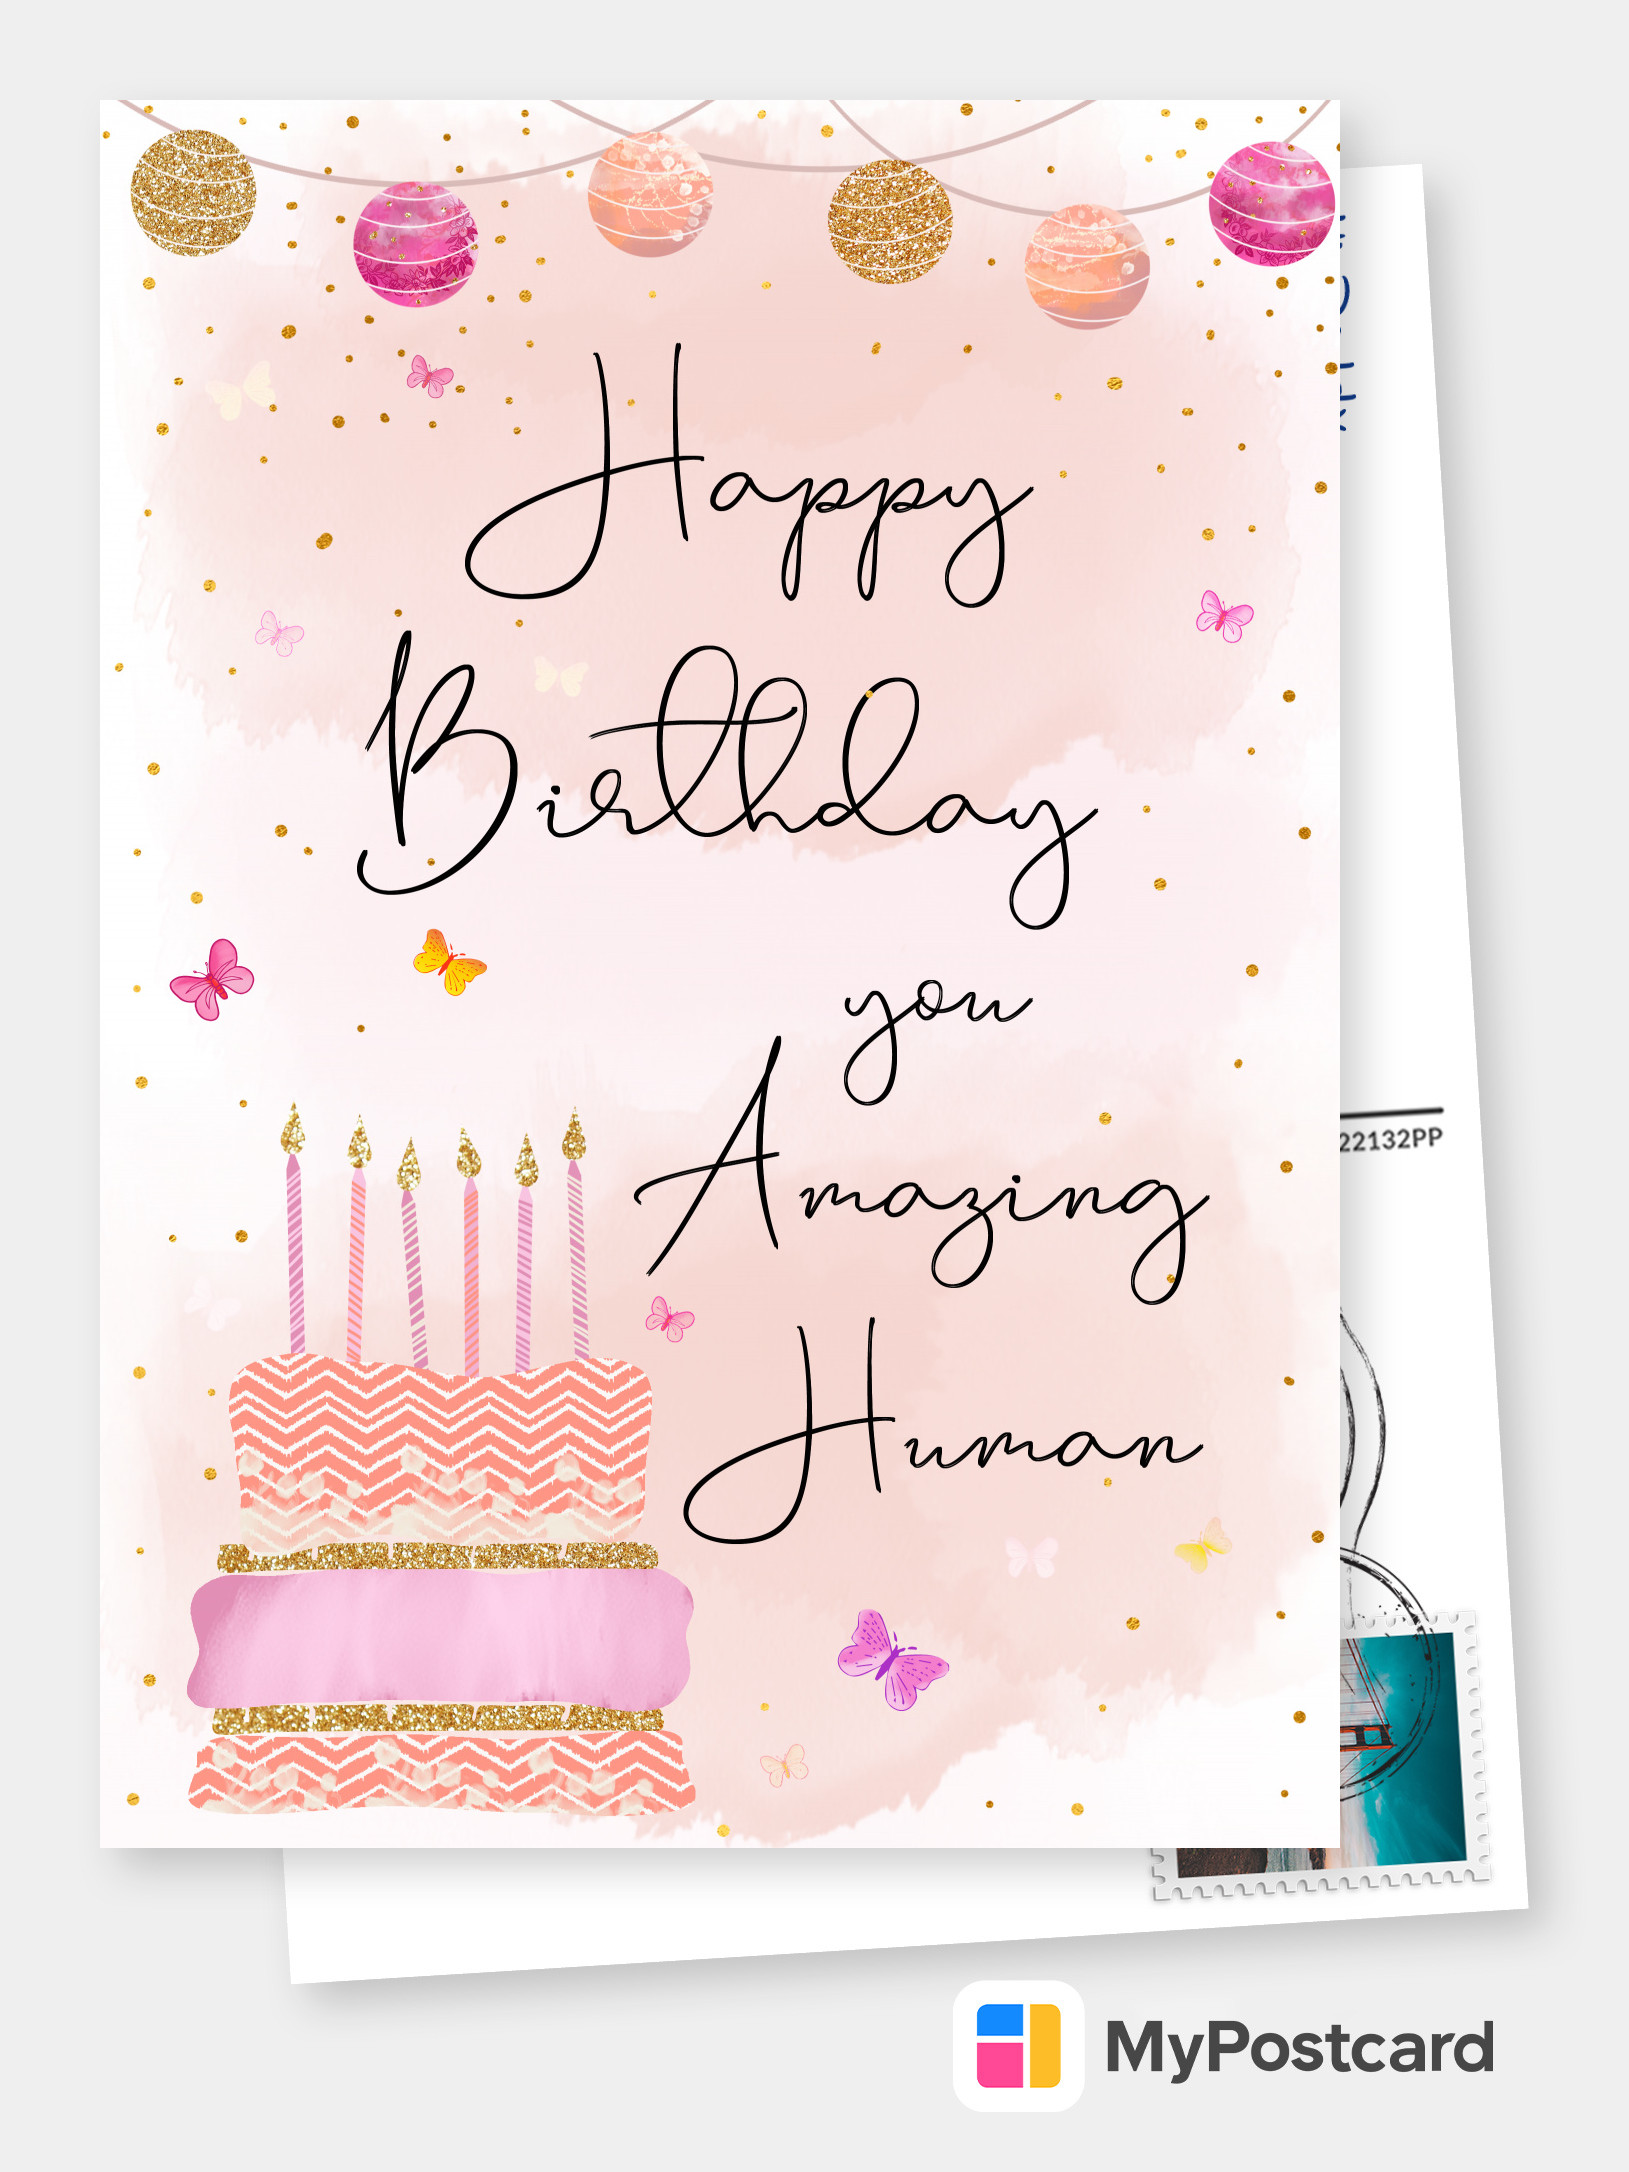 Birthday card - Happy birthday. May all your wishes come true.